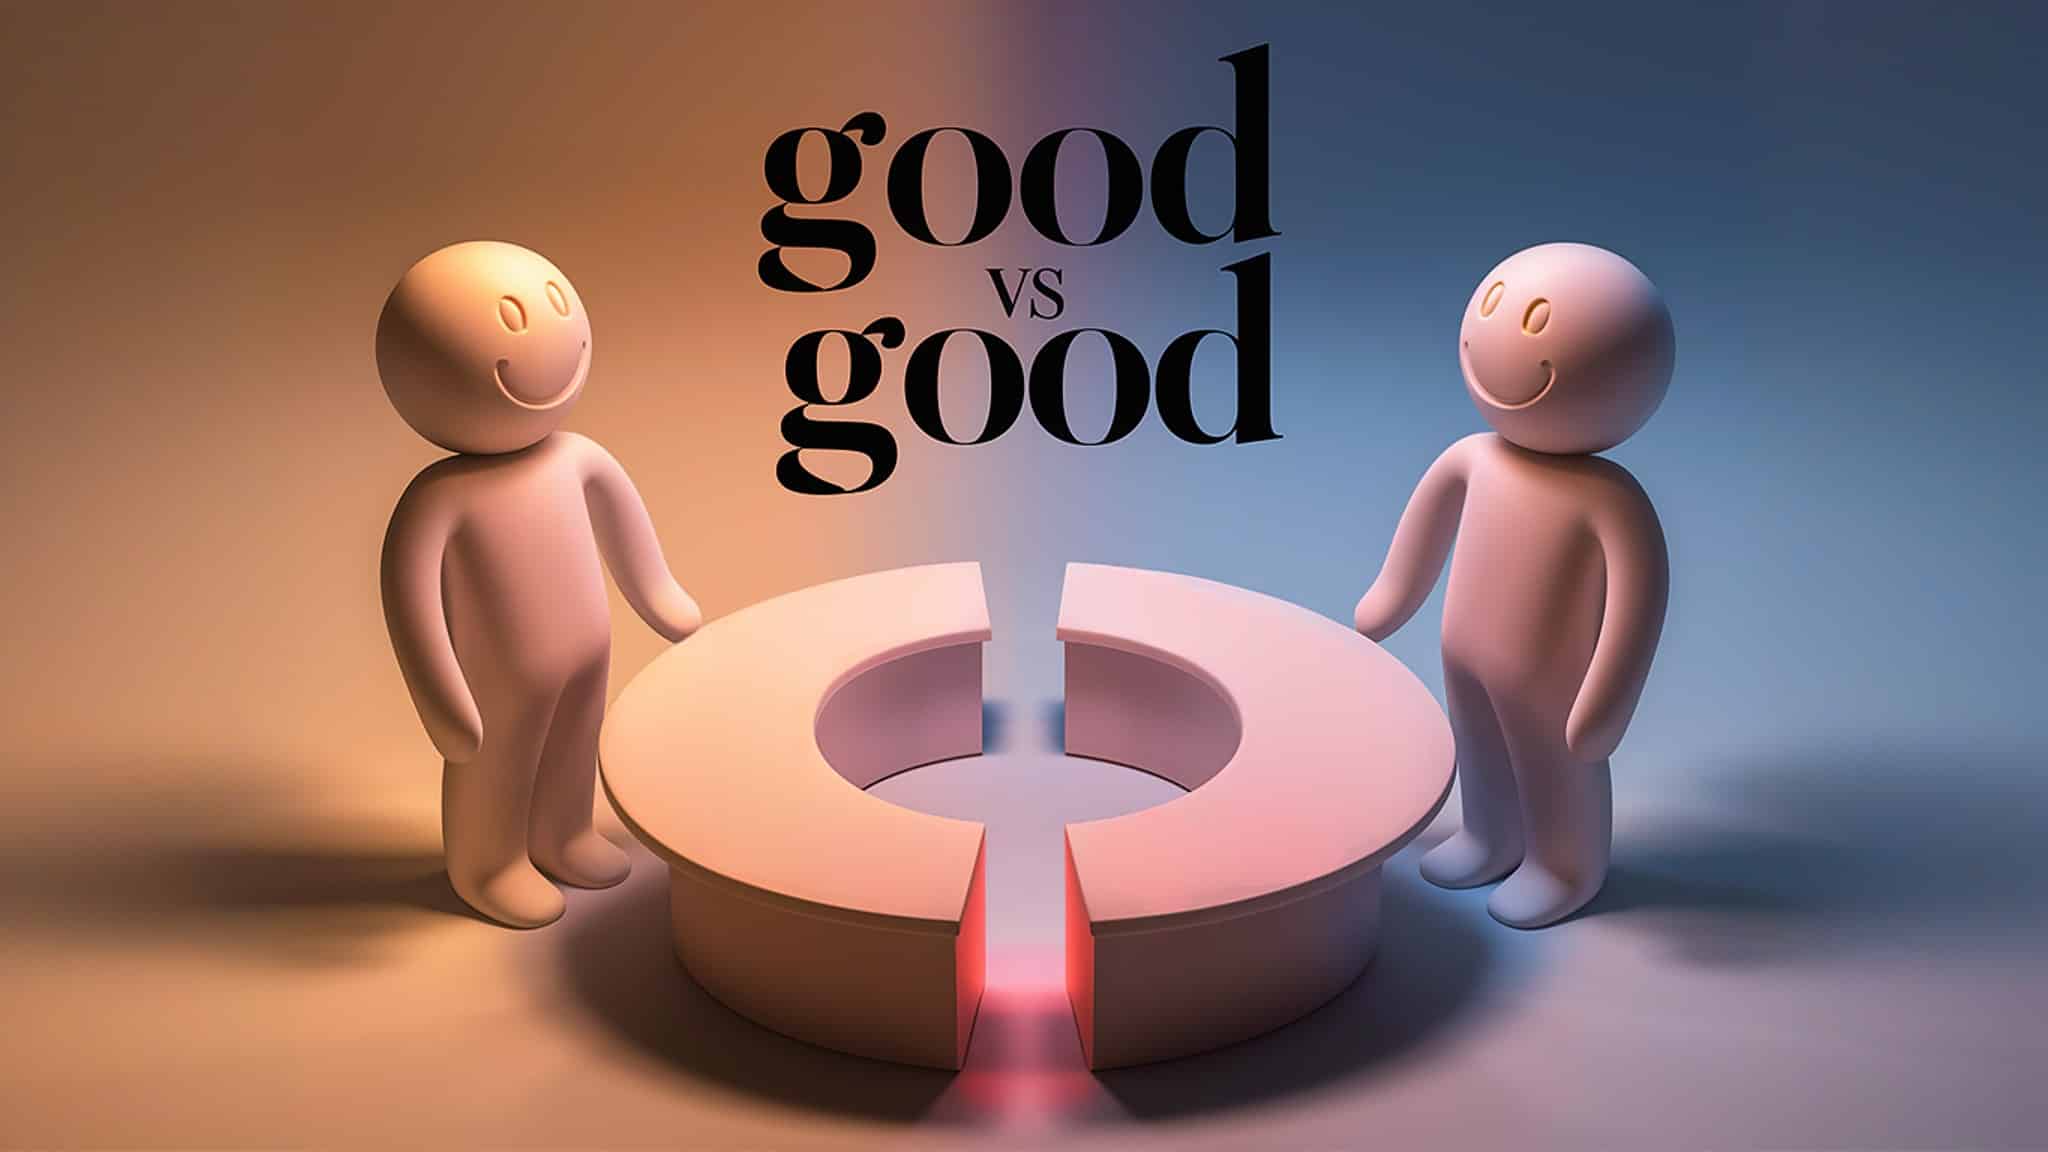 A visual depiction of opposing views. Two simple 3d renderings of human figures are meeting at a table to discuss their disagreement. They are smiling, indicating a positive attitude toward opposing views. 